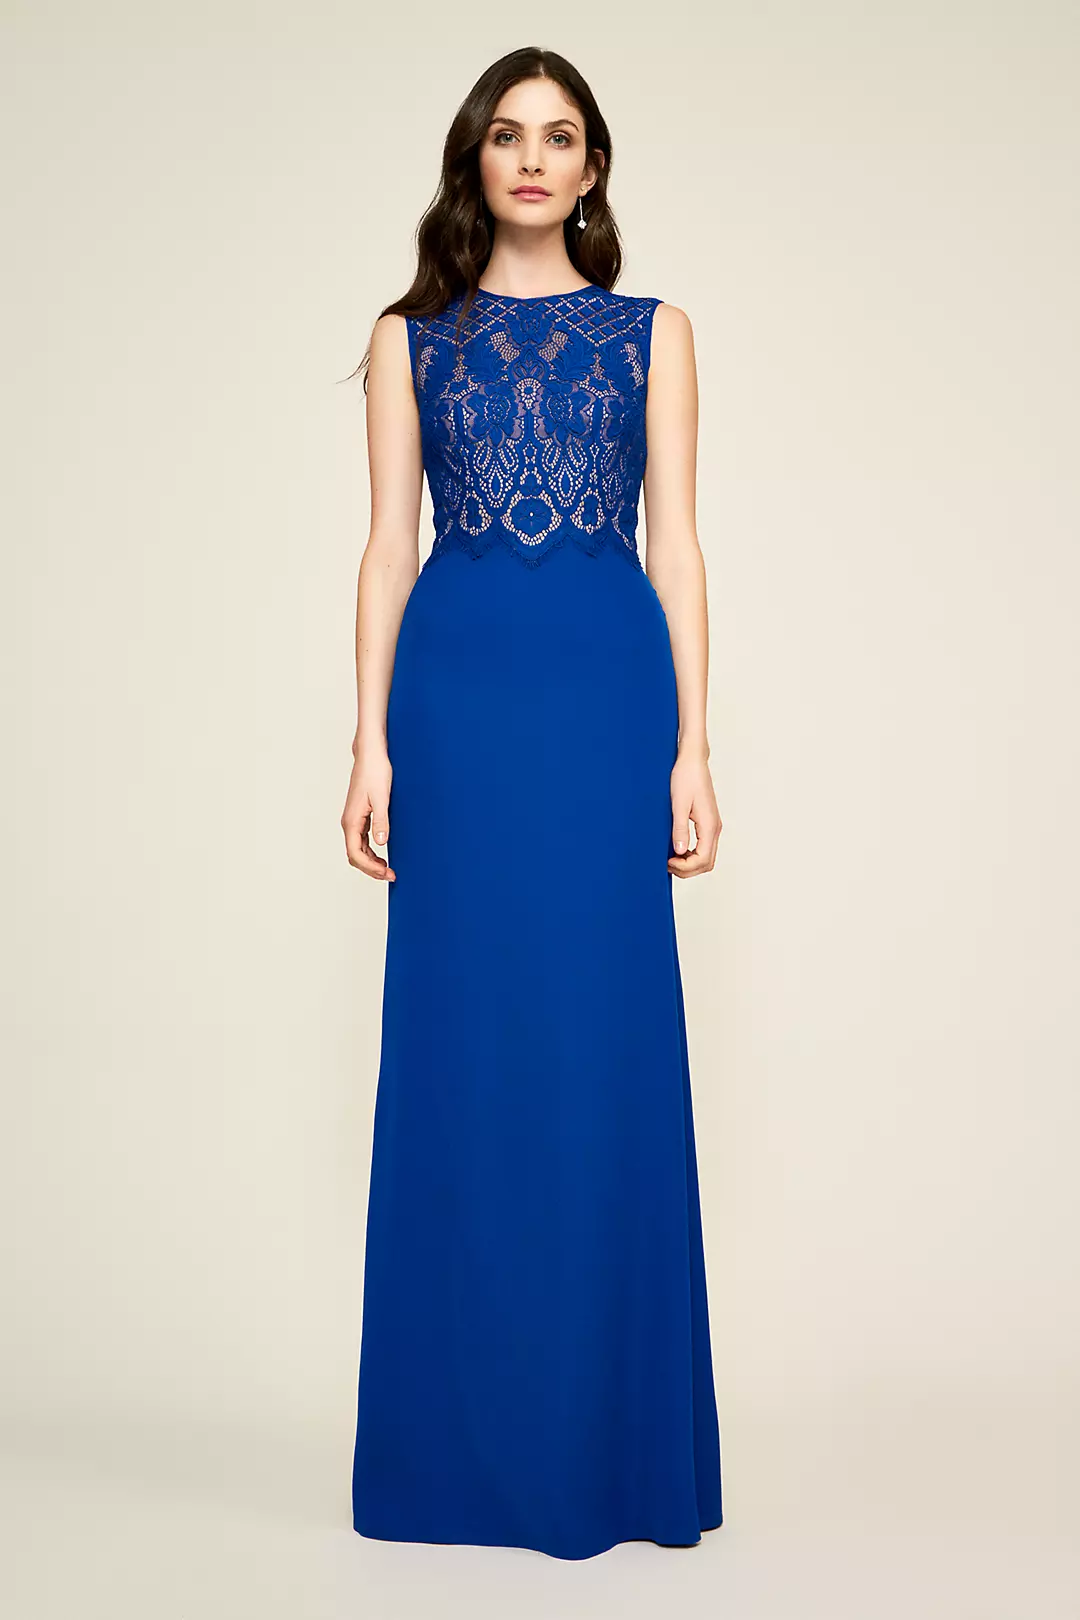 Evandale Lace Gown Image